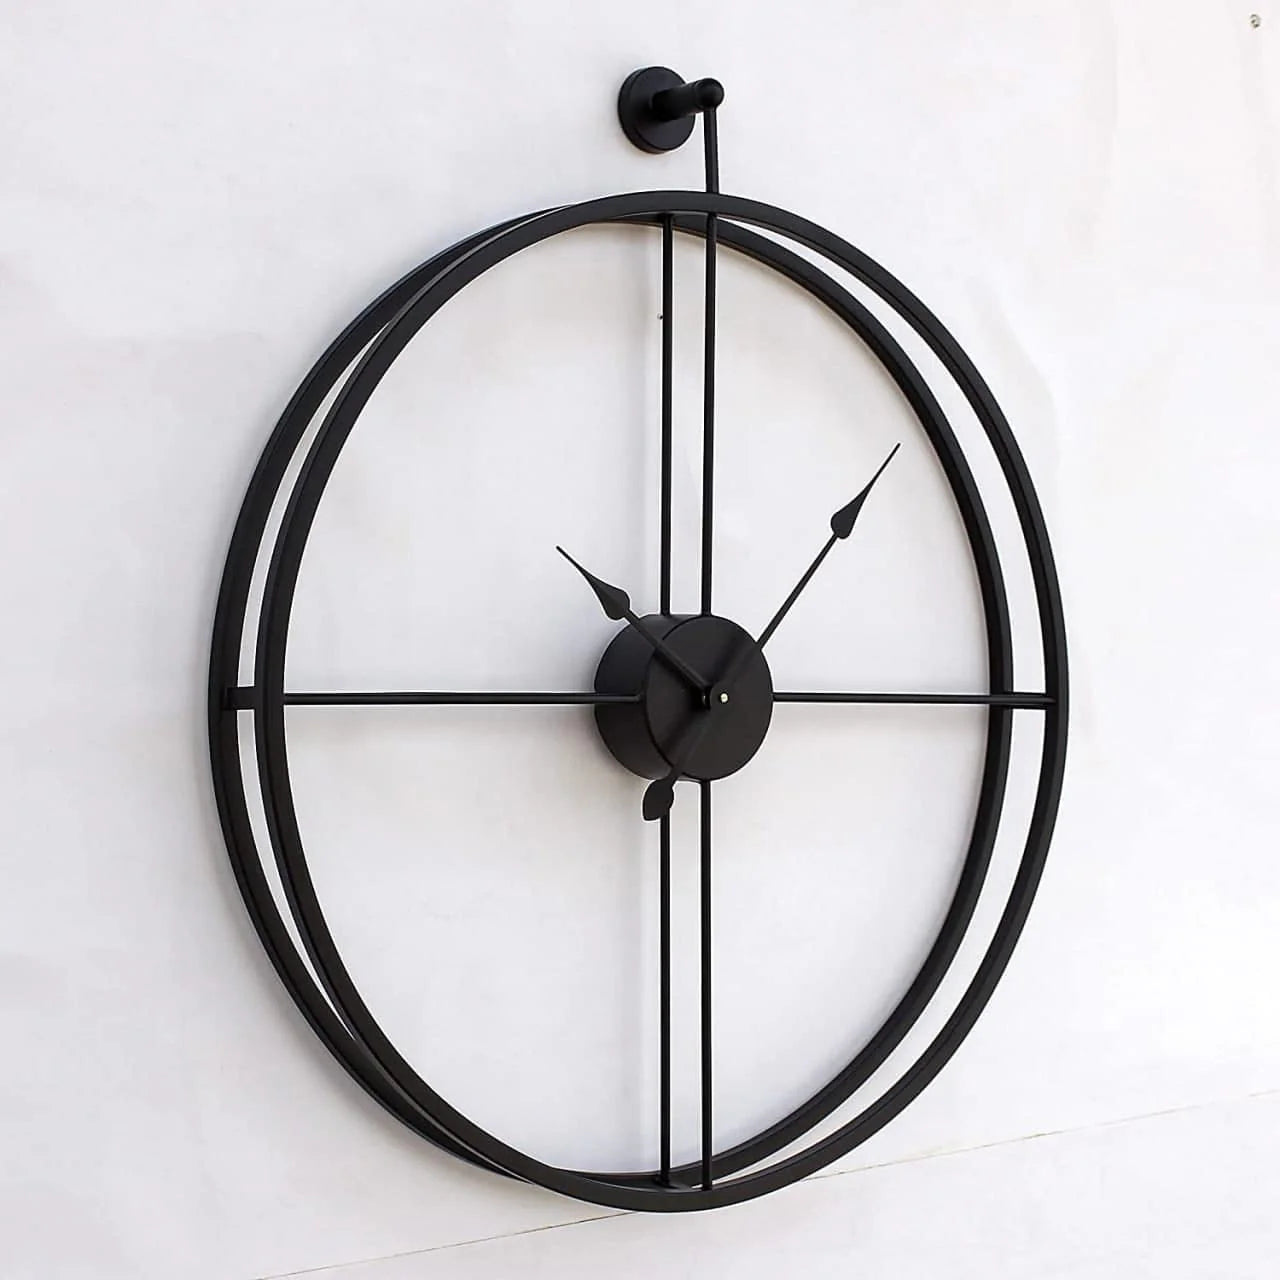 HAND MADE DOUBLE RING BIG SIZE METAL WALL CLOCK (BLACK NEEDLES)